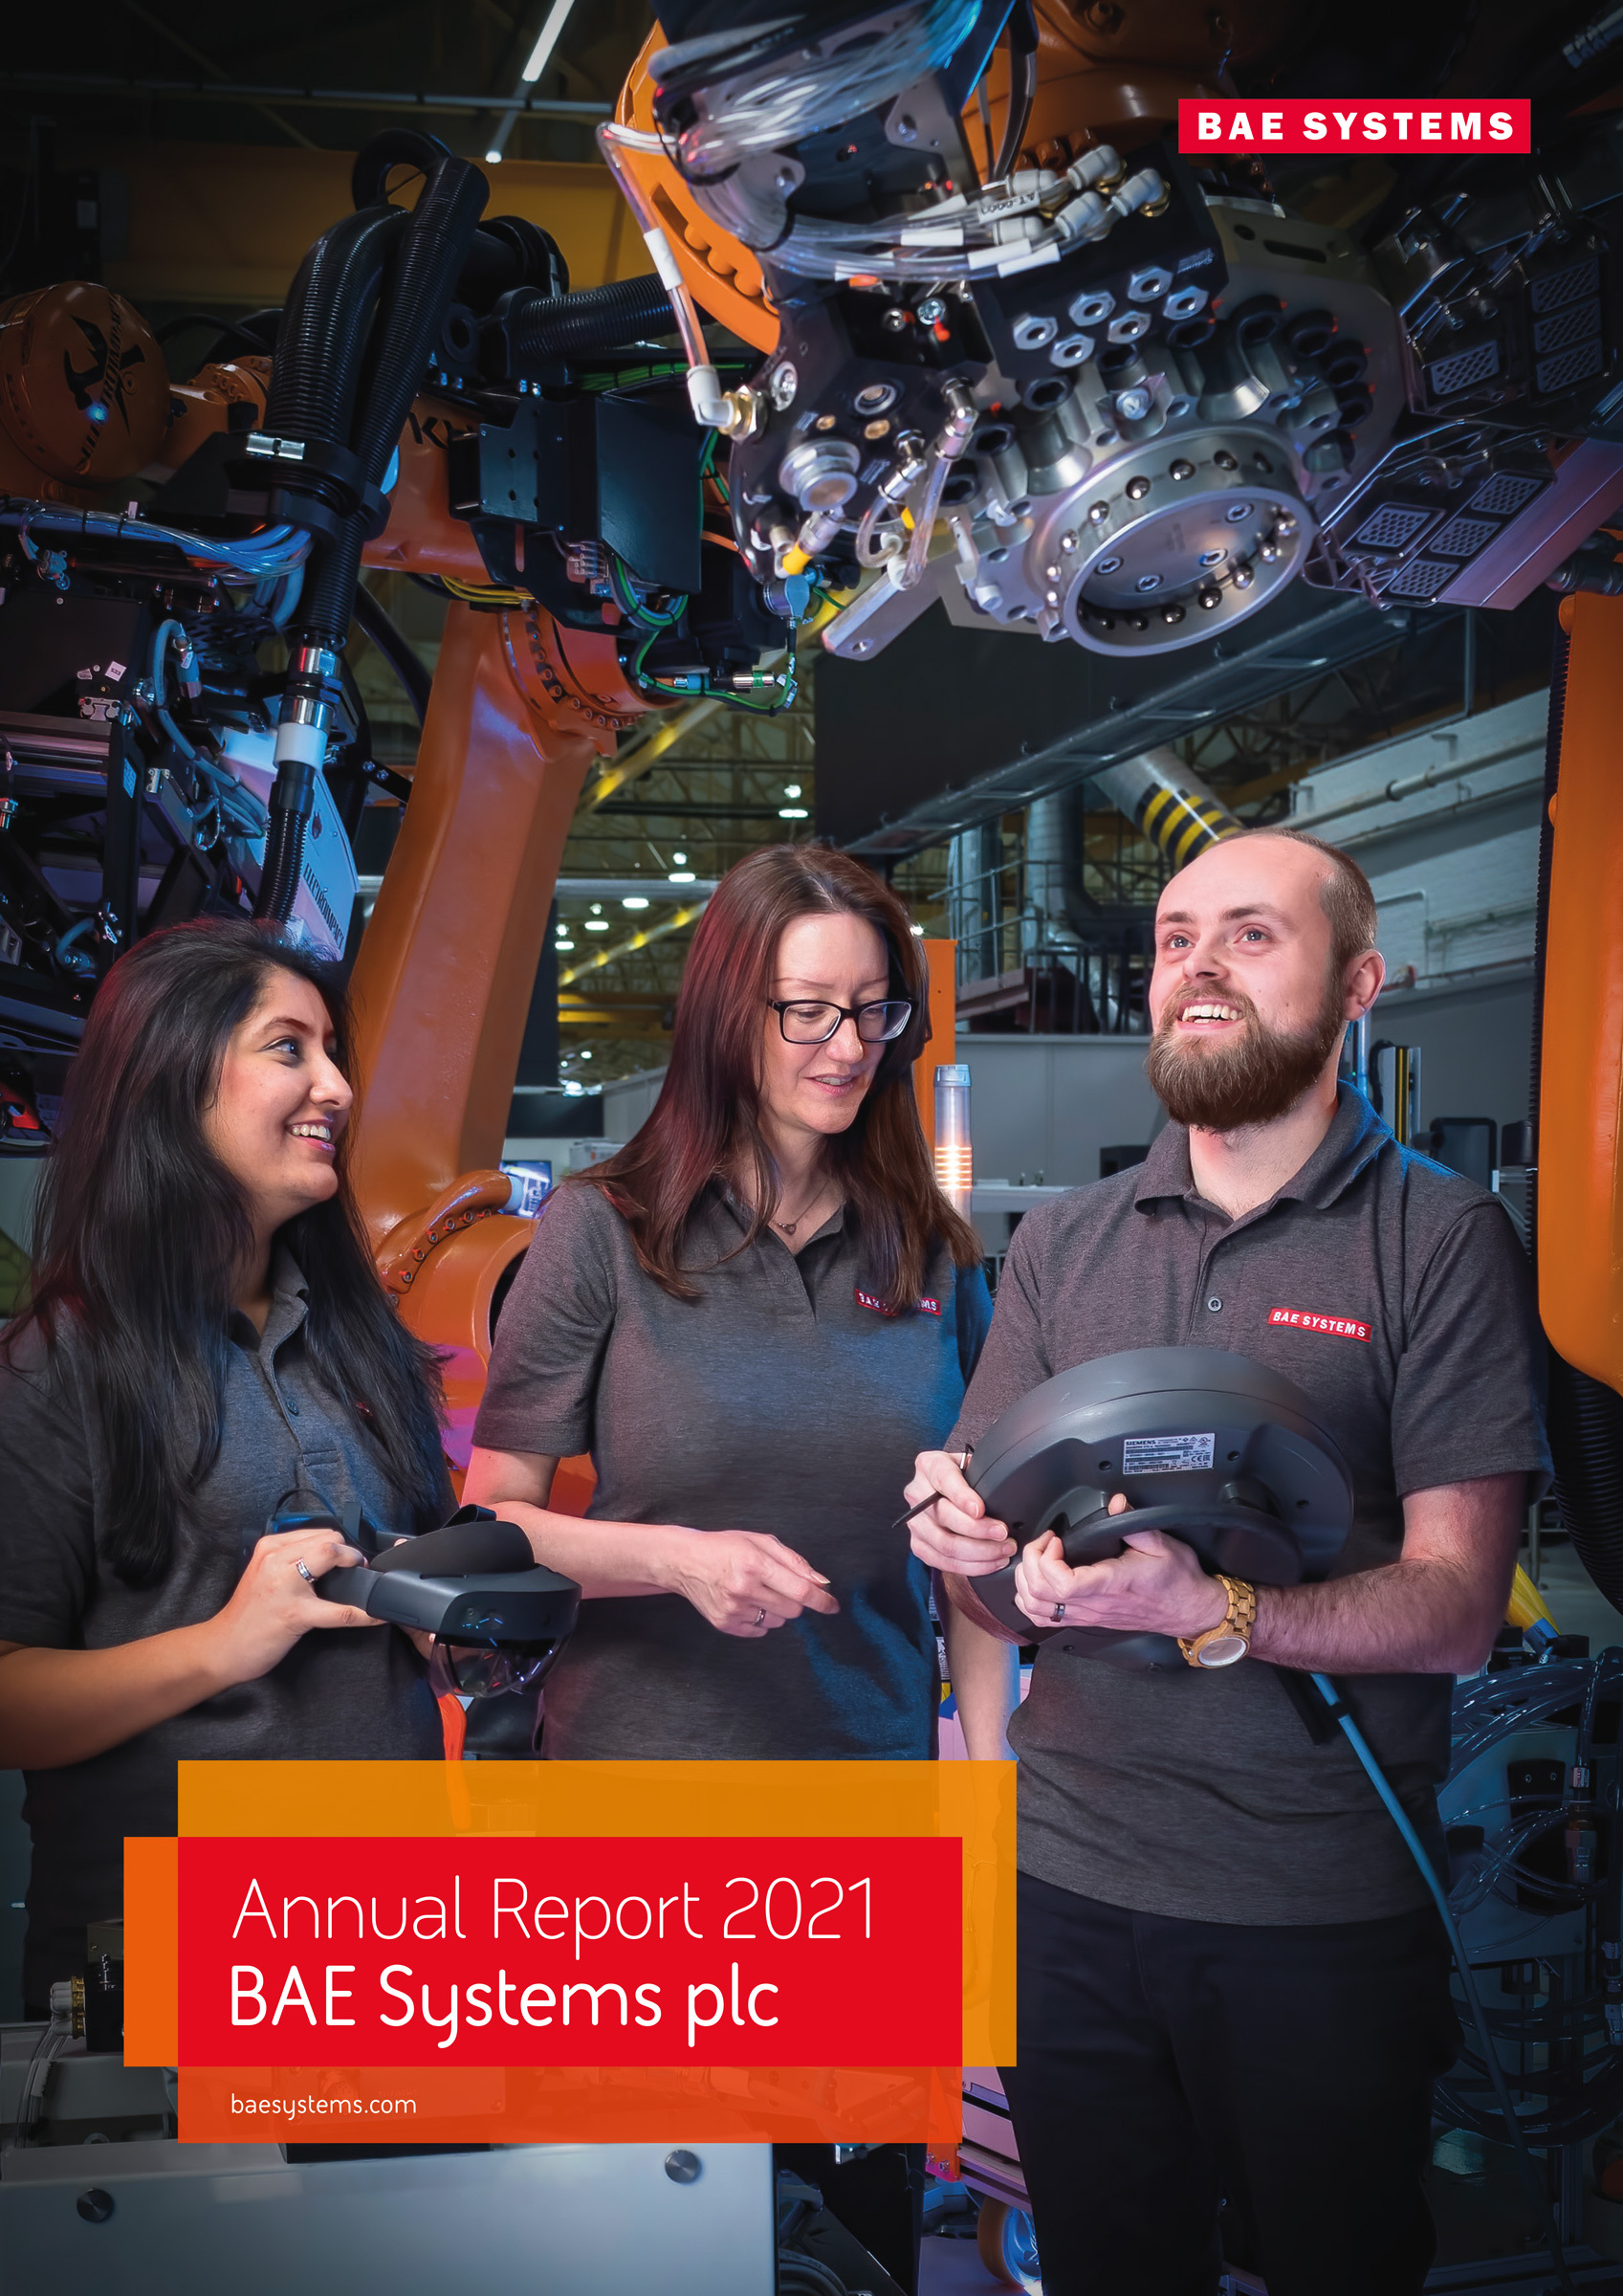 people working with the text "Annual Report 2021 BAE Systems plc"